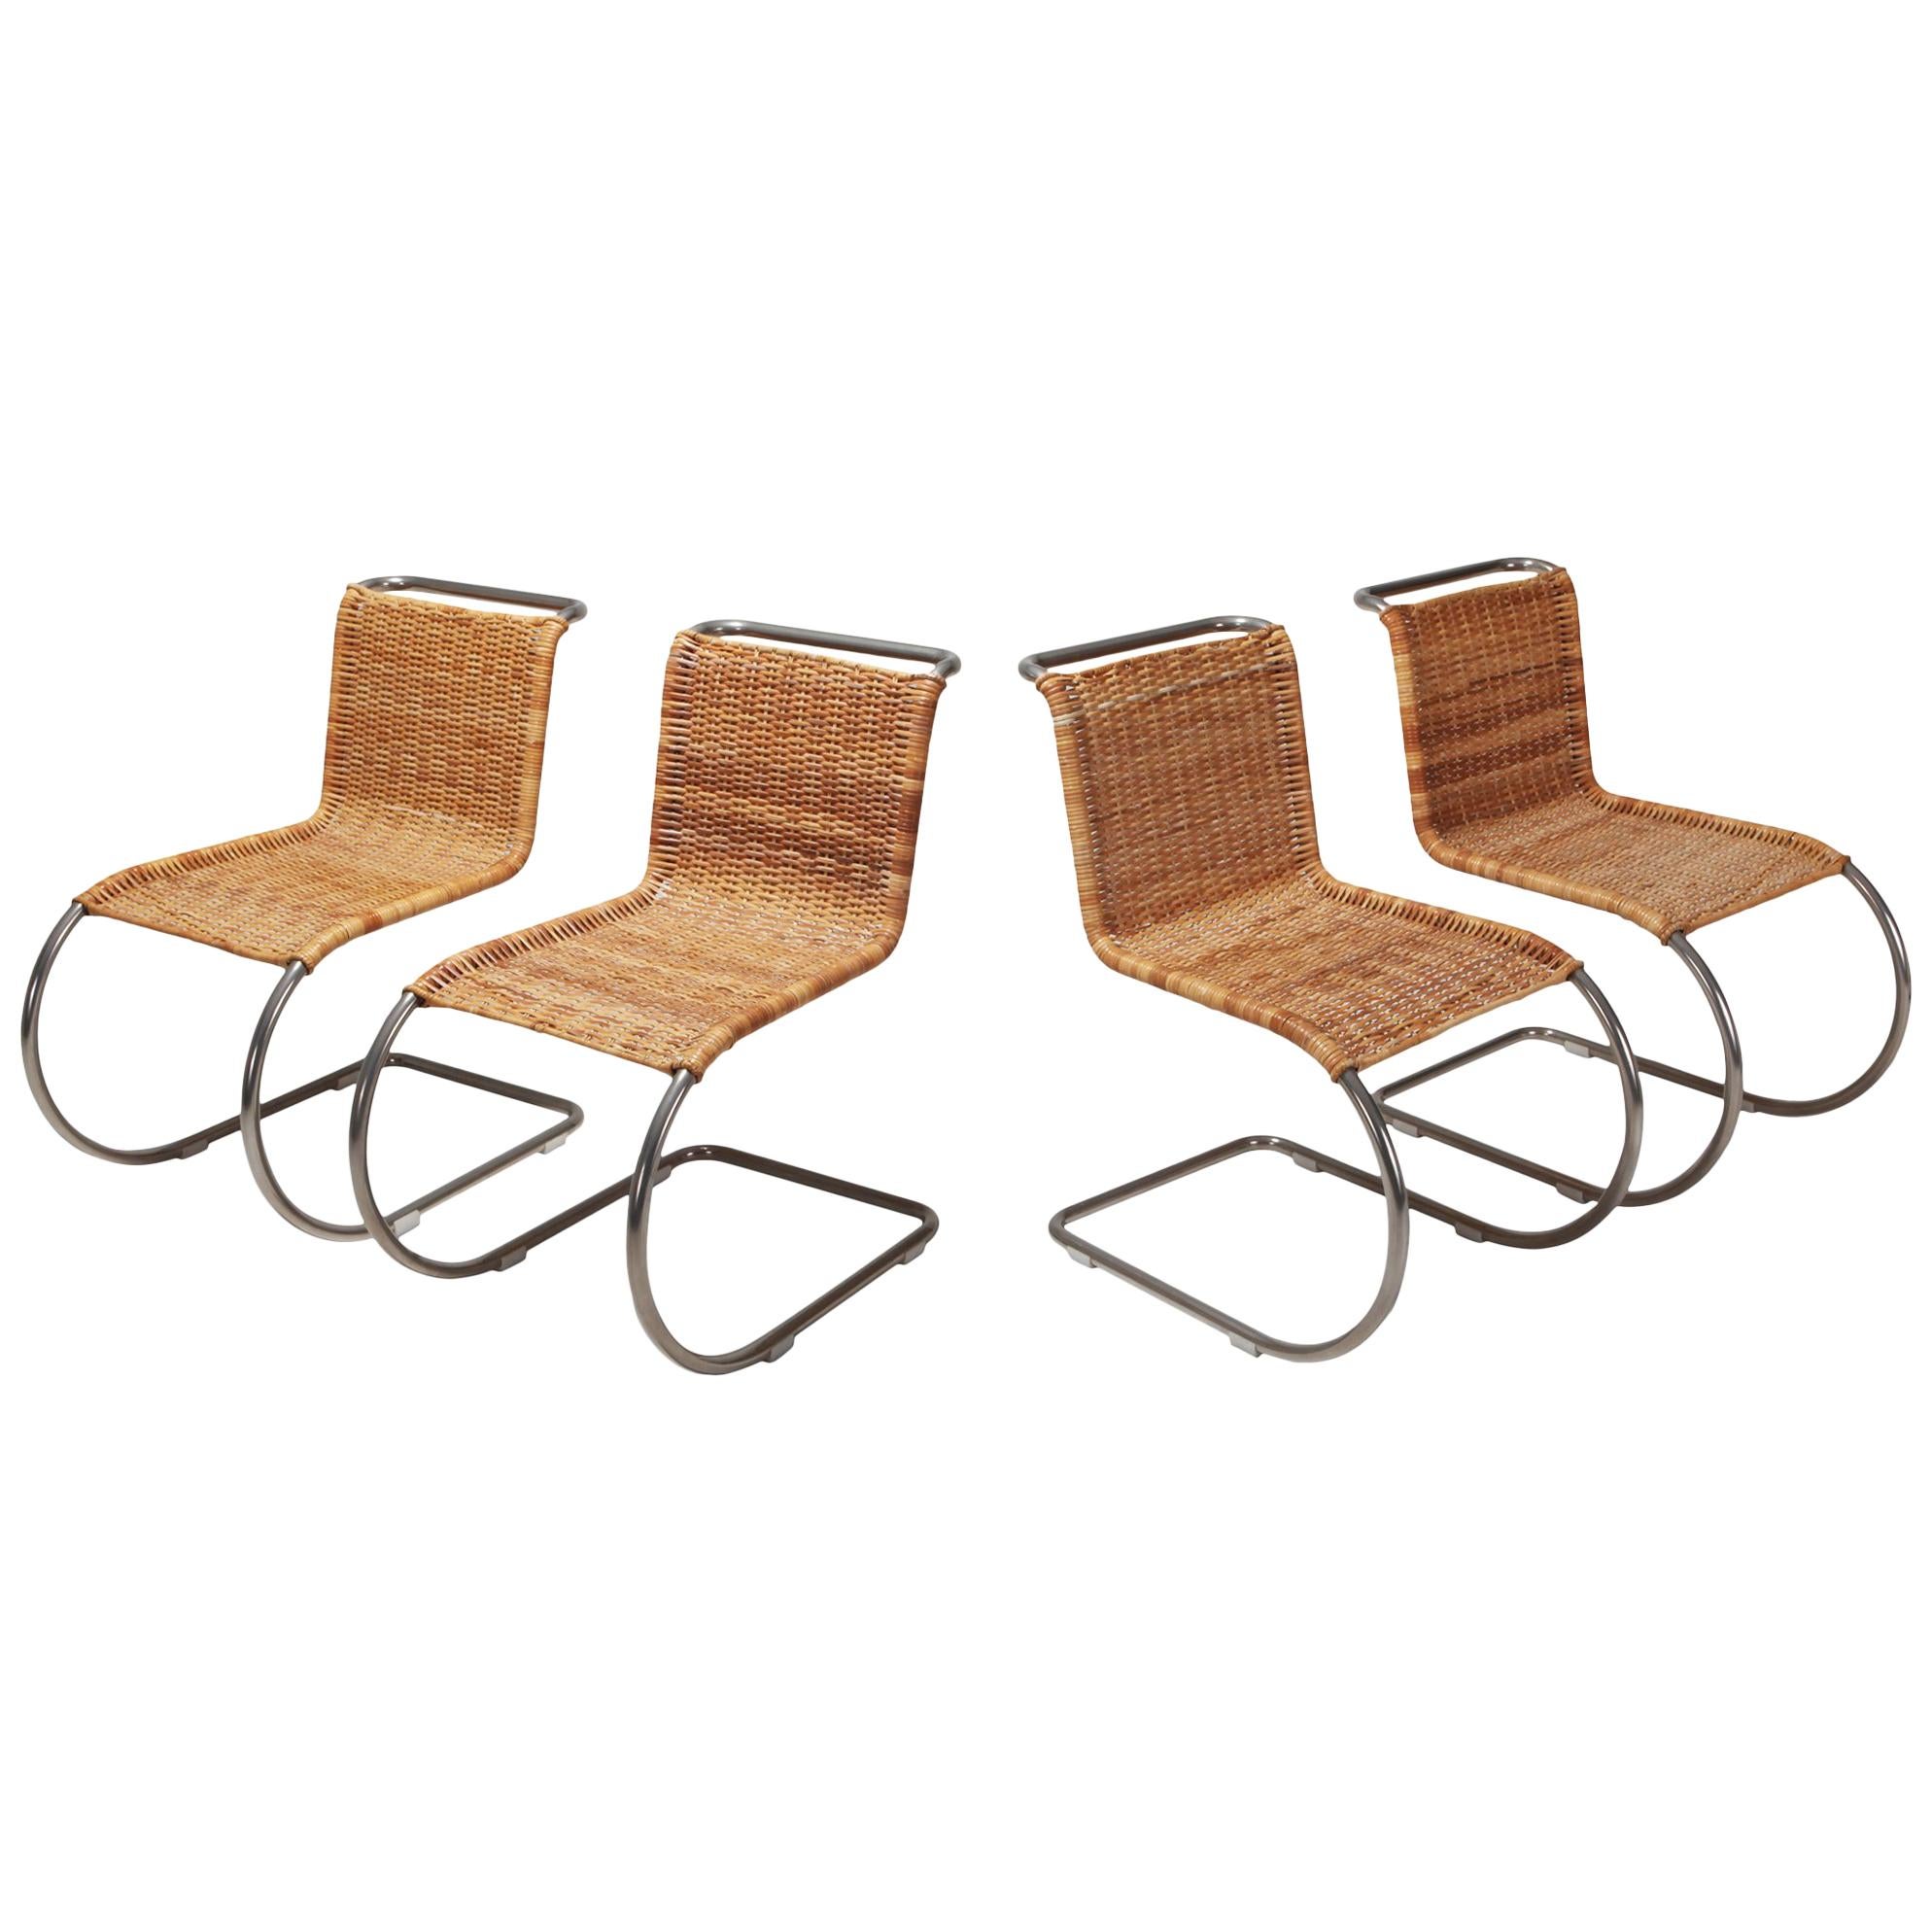 Ludwig Mies van der Rohe Set of Four B42 Weissenhof Chairs by Tecta at  1stDibs